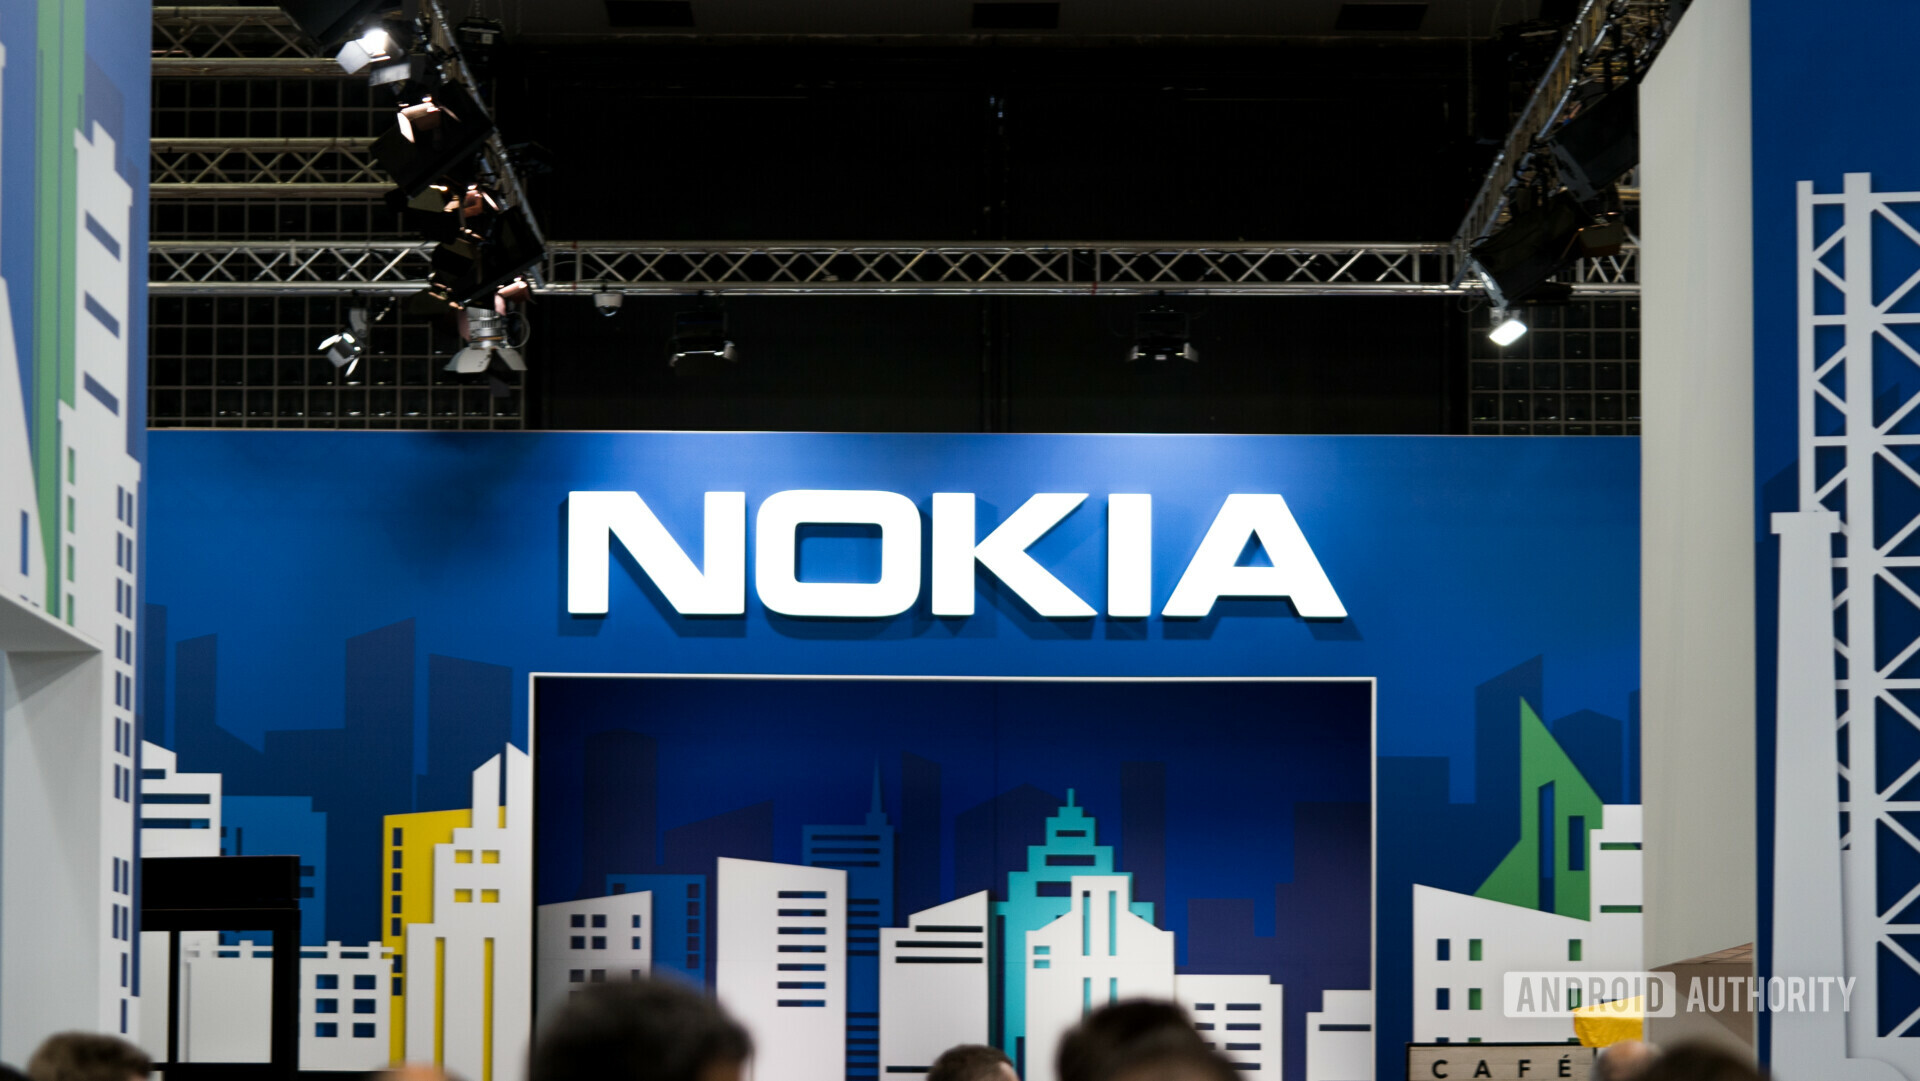 The Nokia logo on an event banner.